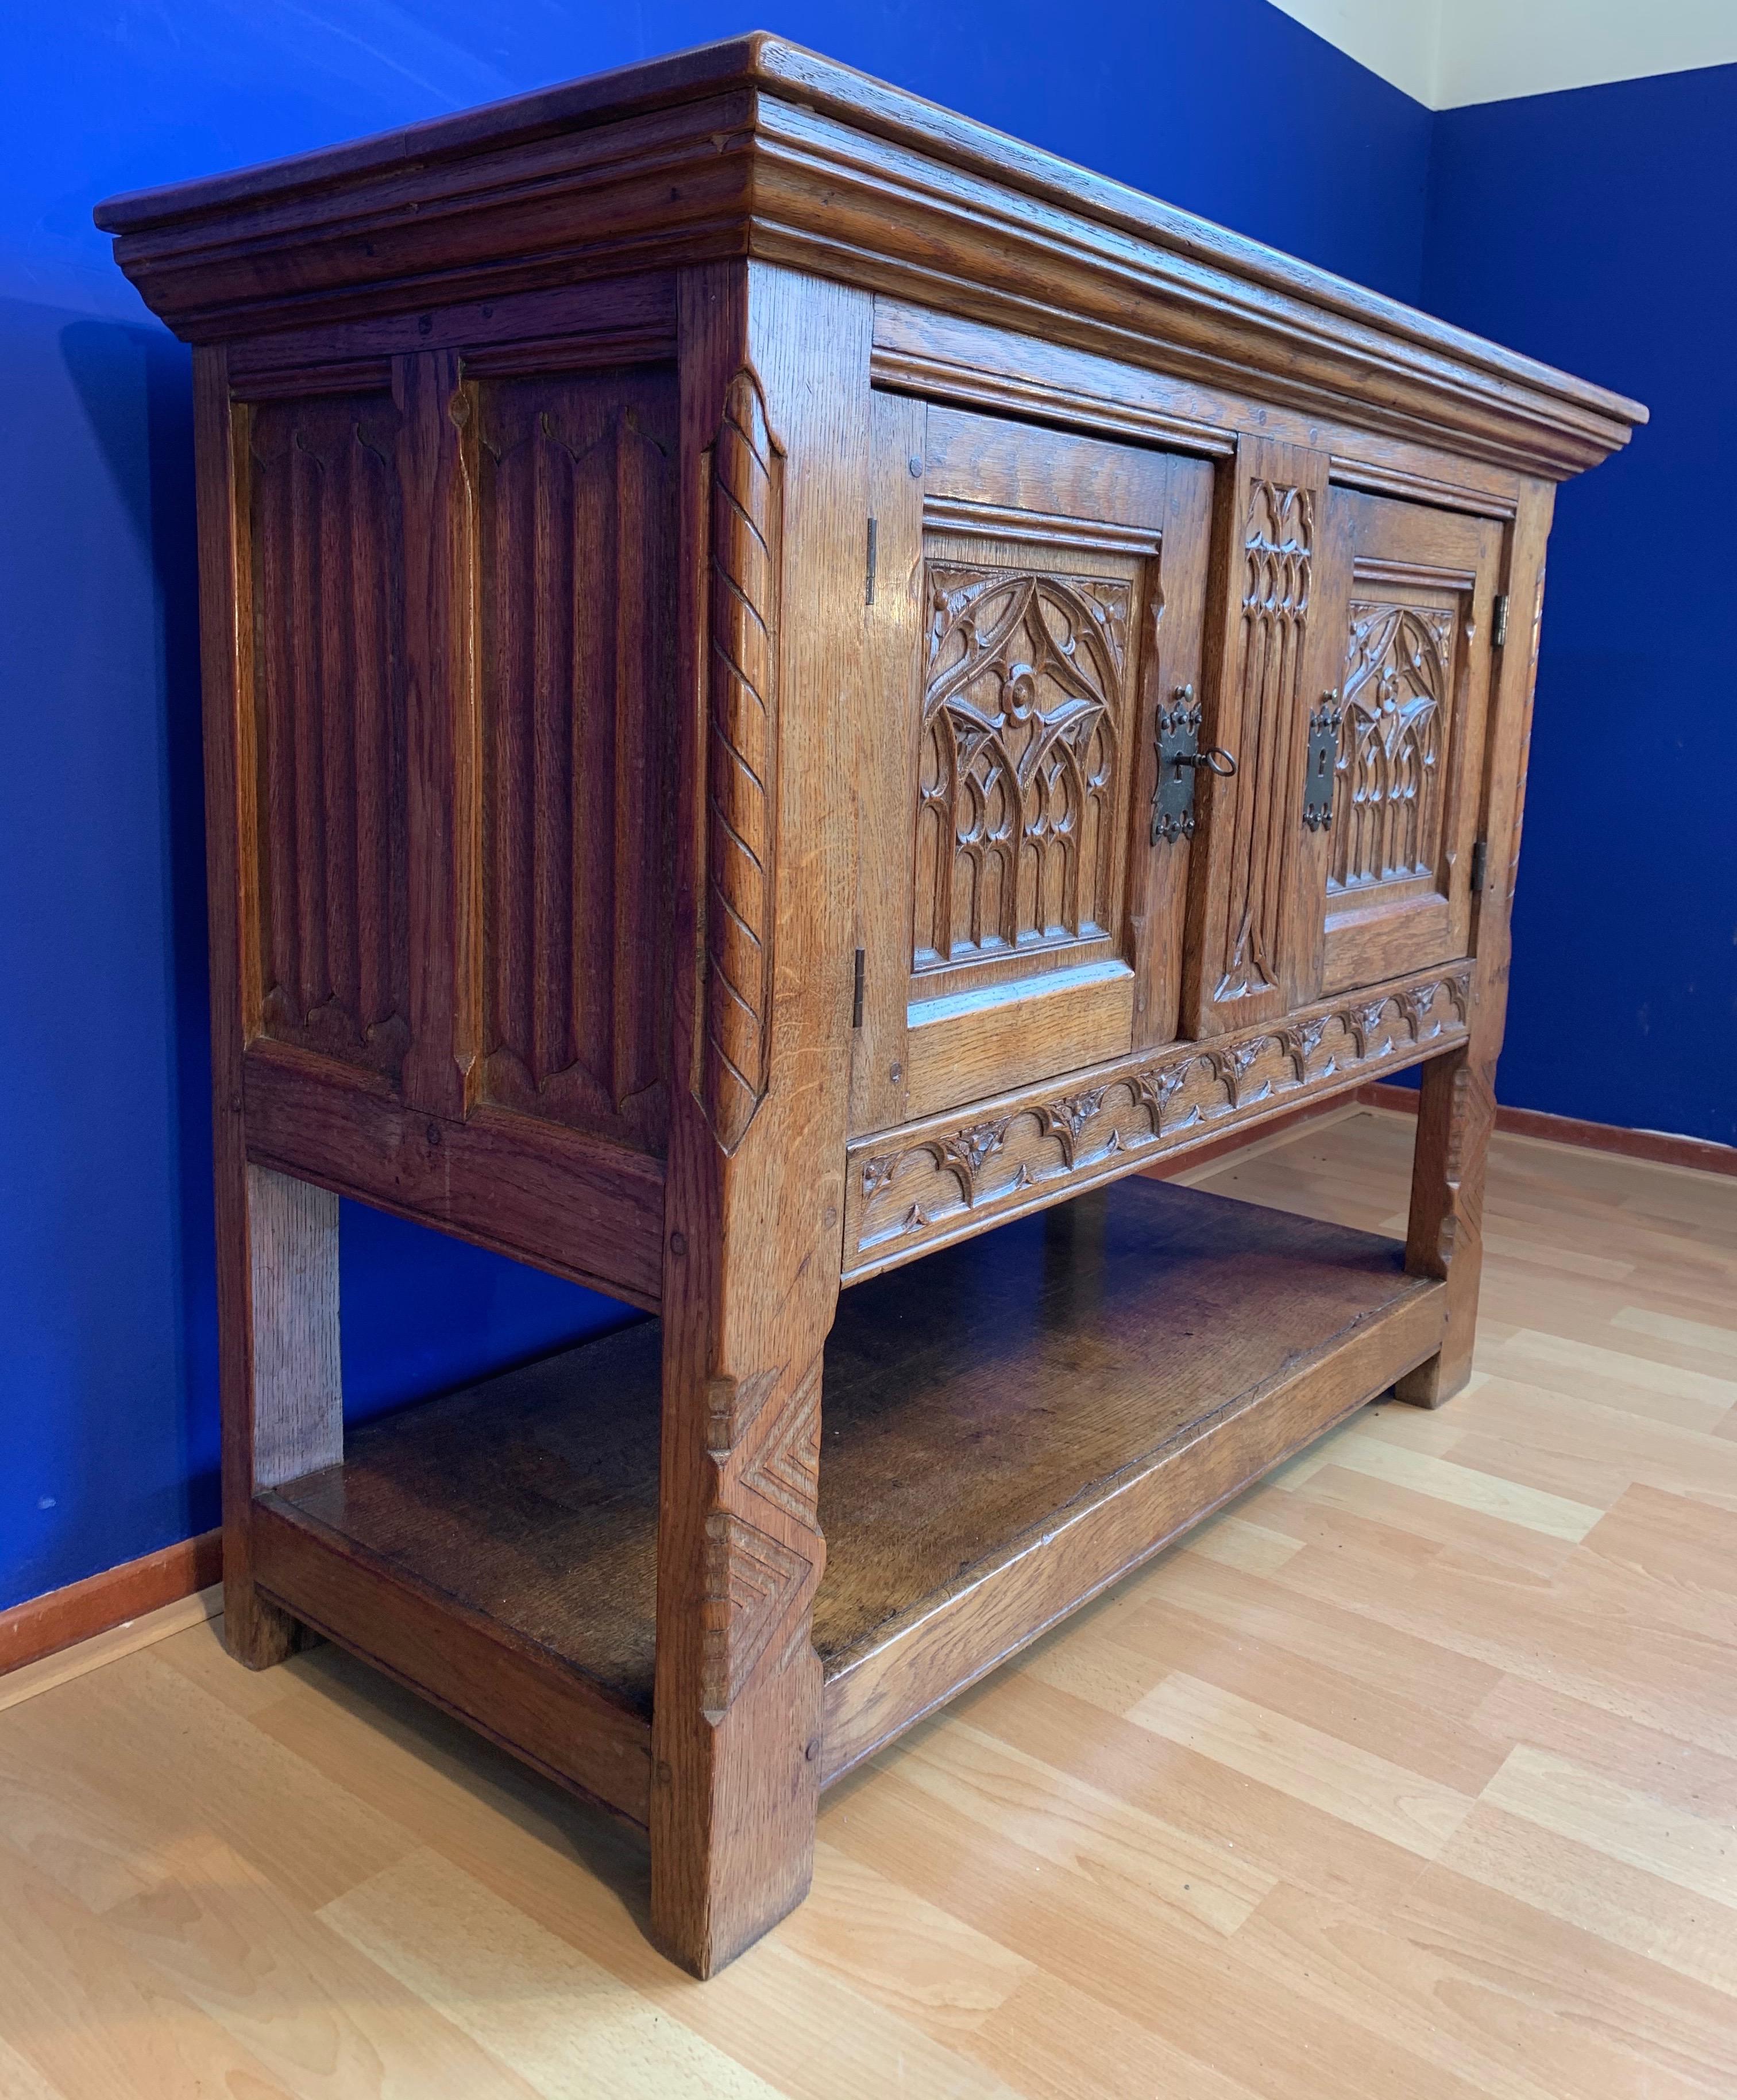 Early 20th century, solid tiger oak Gothic cabinet.

This beautifully and deeply carved tiger oak sideboard from the early 1900s is in very good condition. It comes with top quality carved details and you could not wish for a more attractive patina.